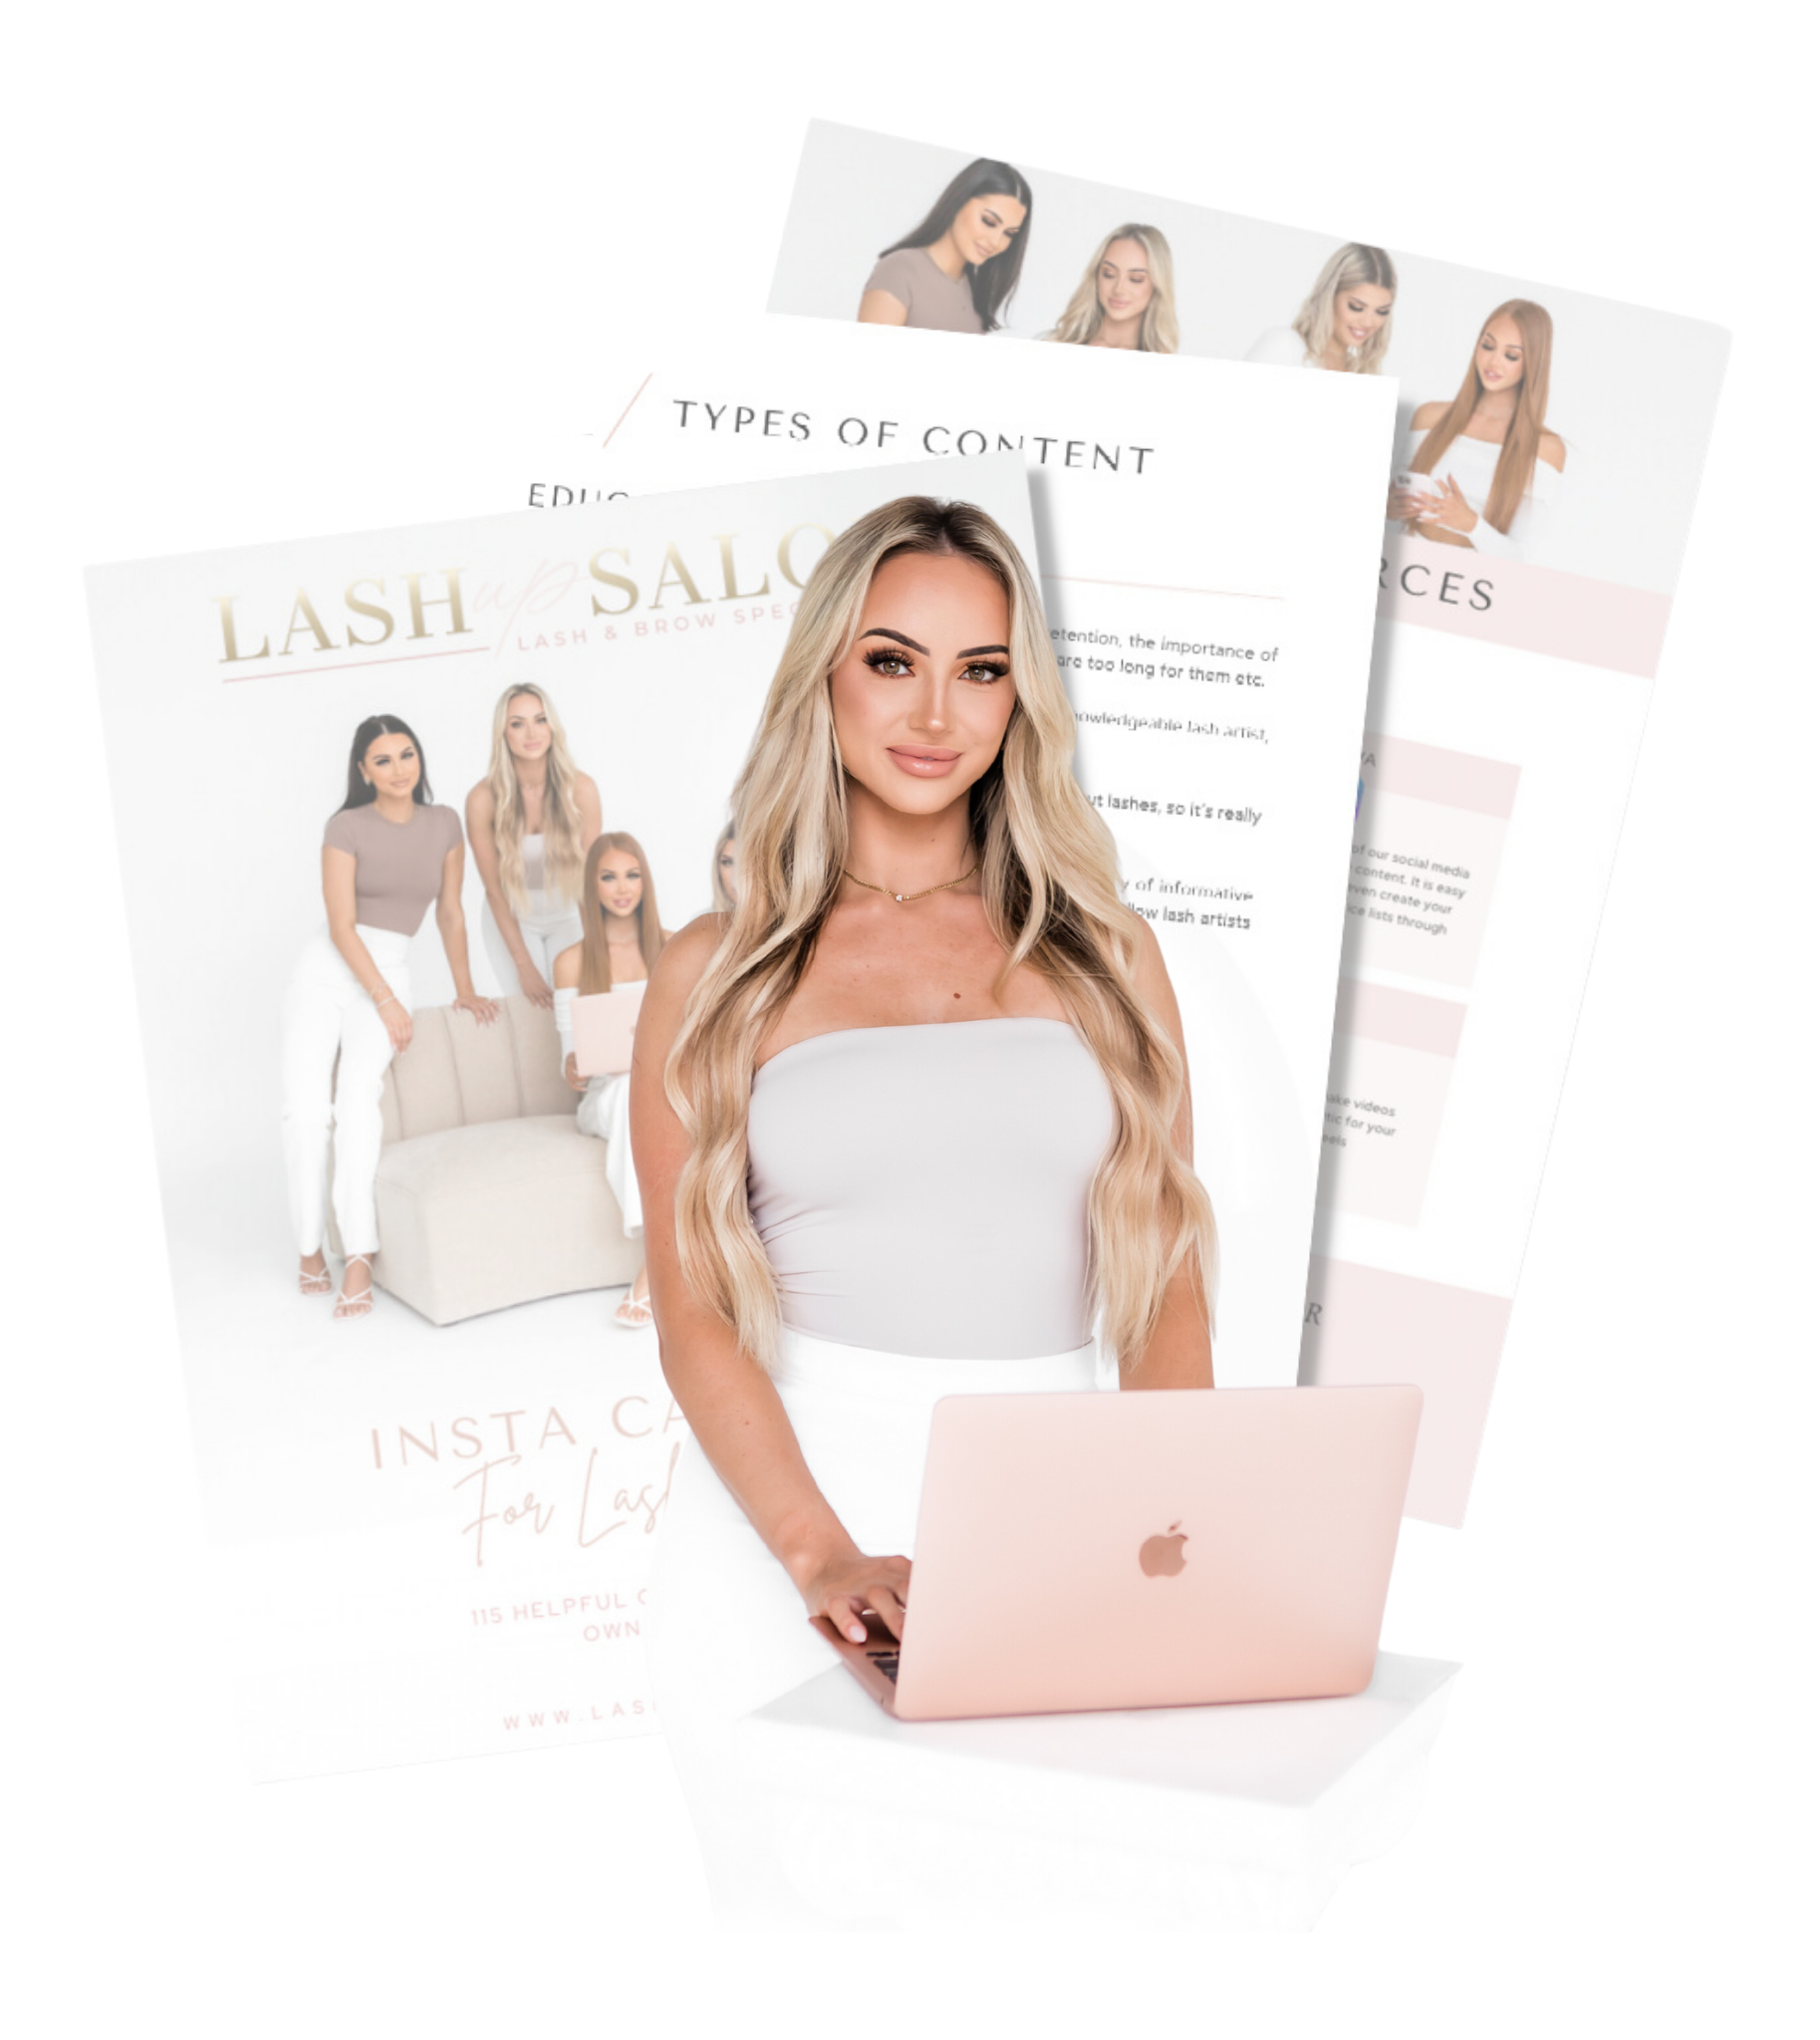 TAYLAH SMALL LASH COURSE MARKETING MATERIAL INCLUDED.png__PID:22fd2d88-f3d3-4bf1-be71-e56099304767